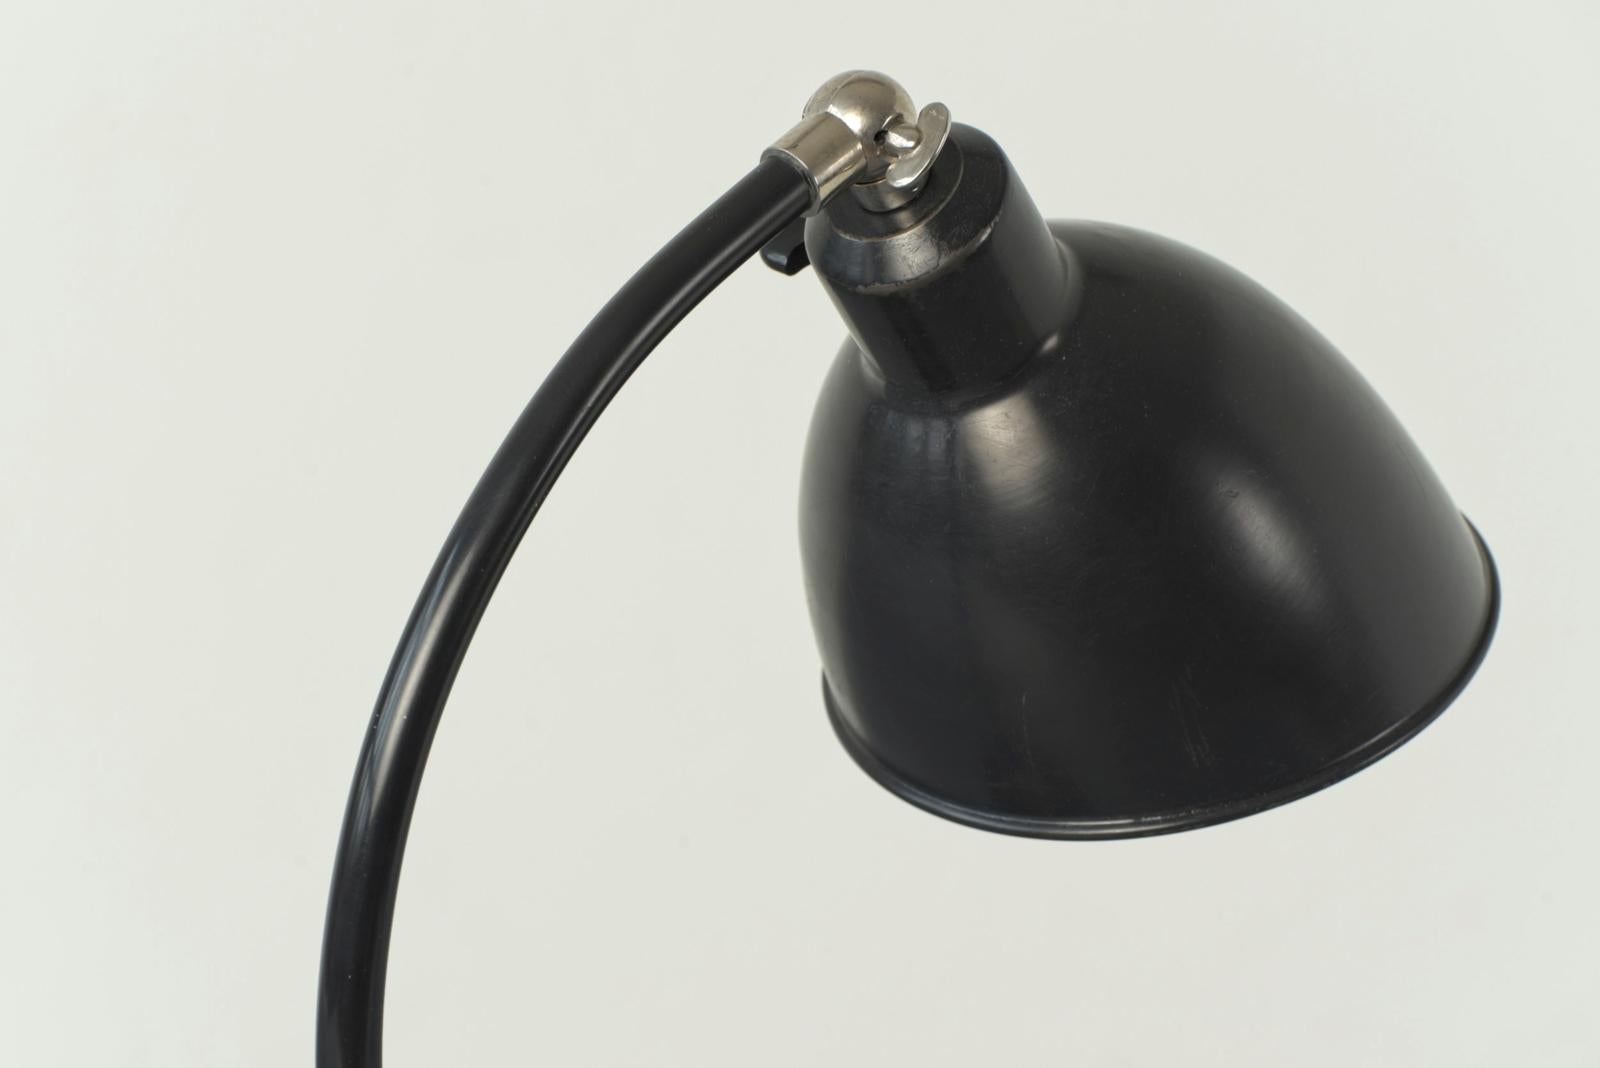 Table Lamp Polo-Populär by Christian Dell for Bünte + Remmler, Germany - 1930 For Sale 6